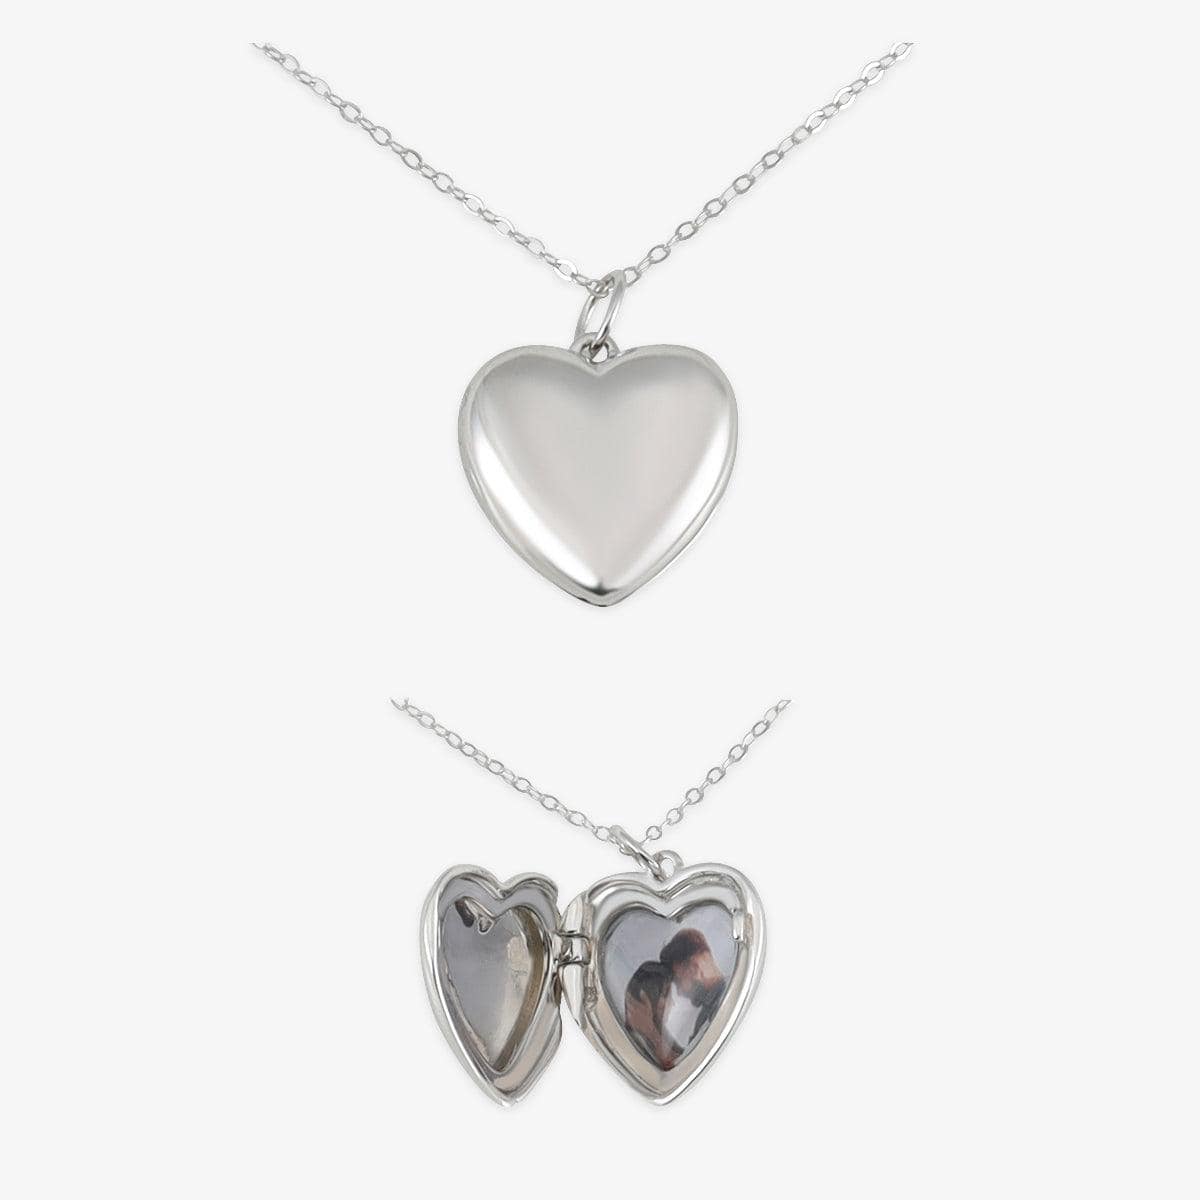 herzschmuck Engraved Necklaces Personalized Heart Photo Locket Necklace